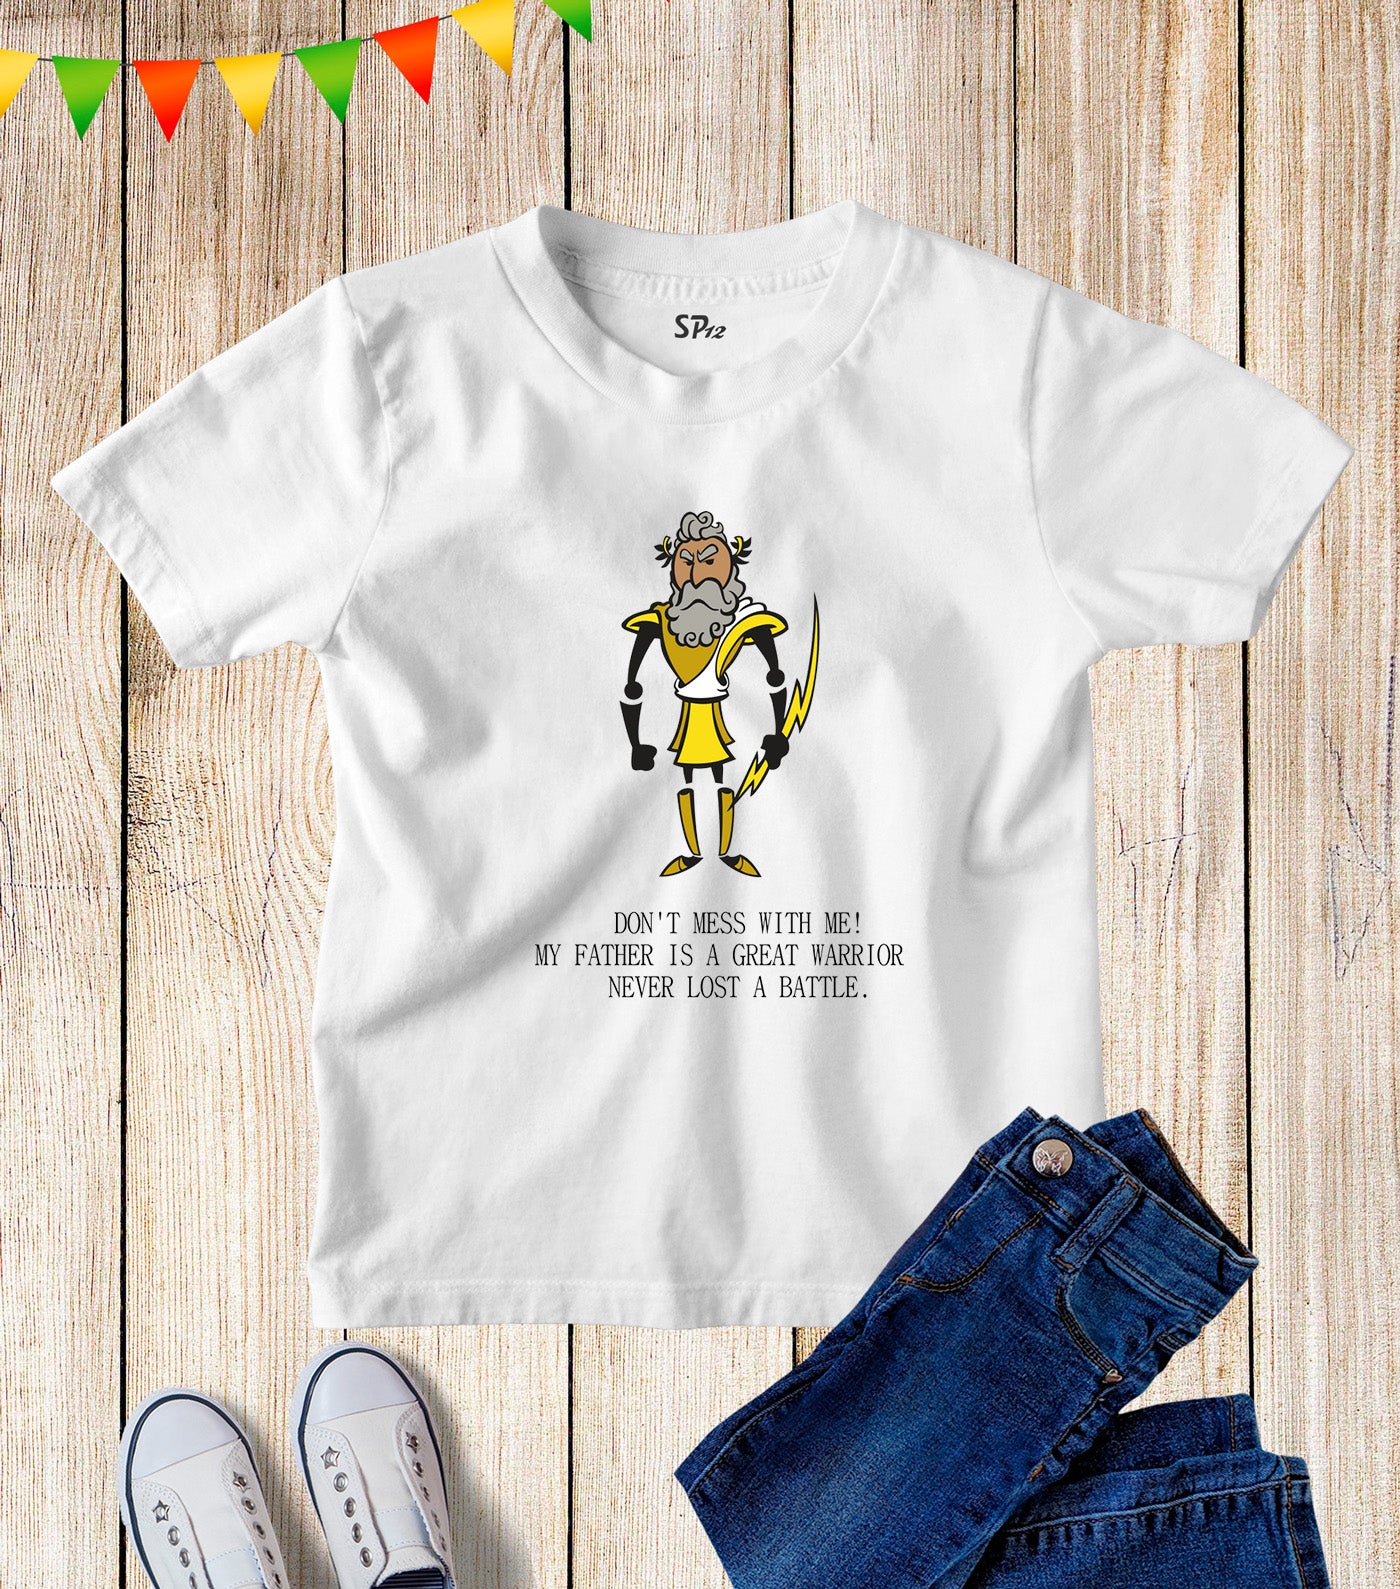 My Father Is A Great Warrior Kids T Shirt